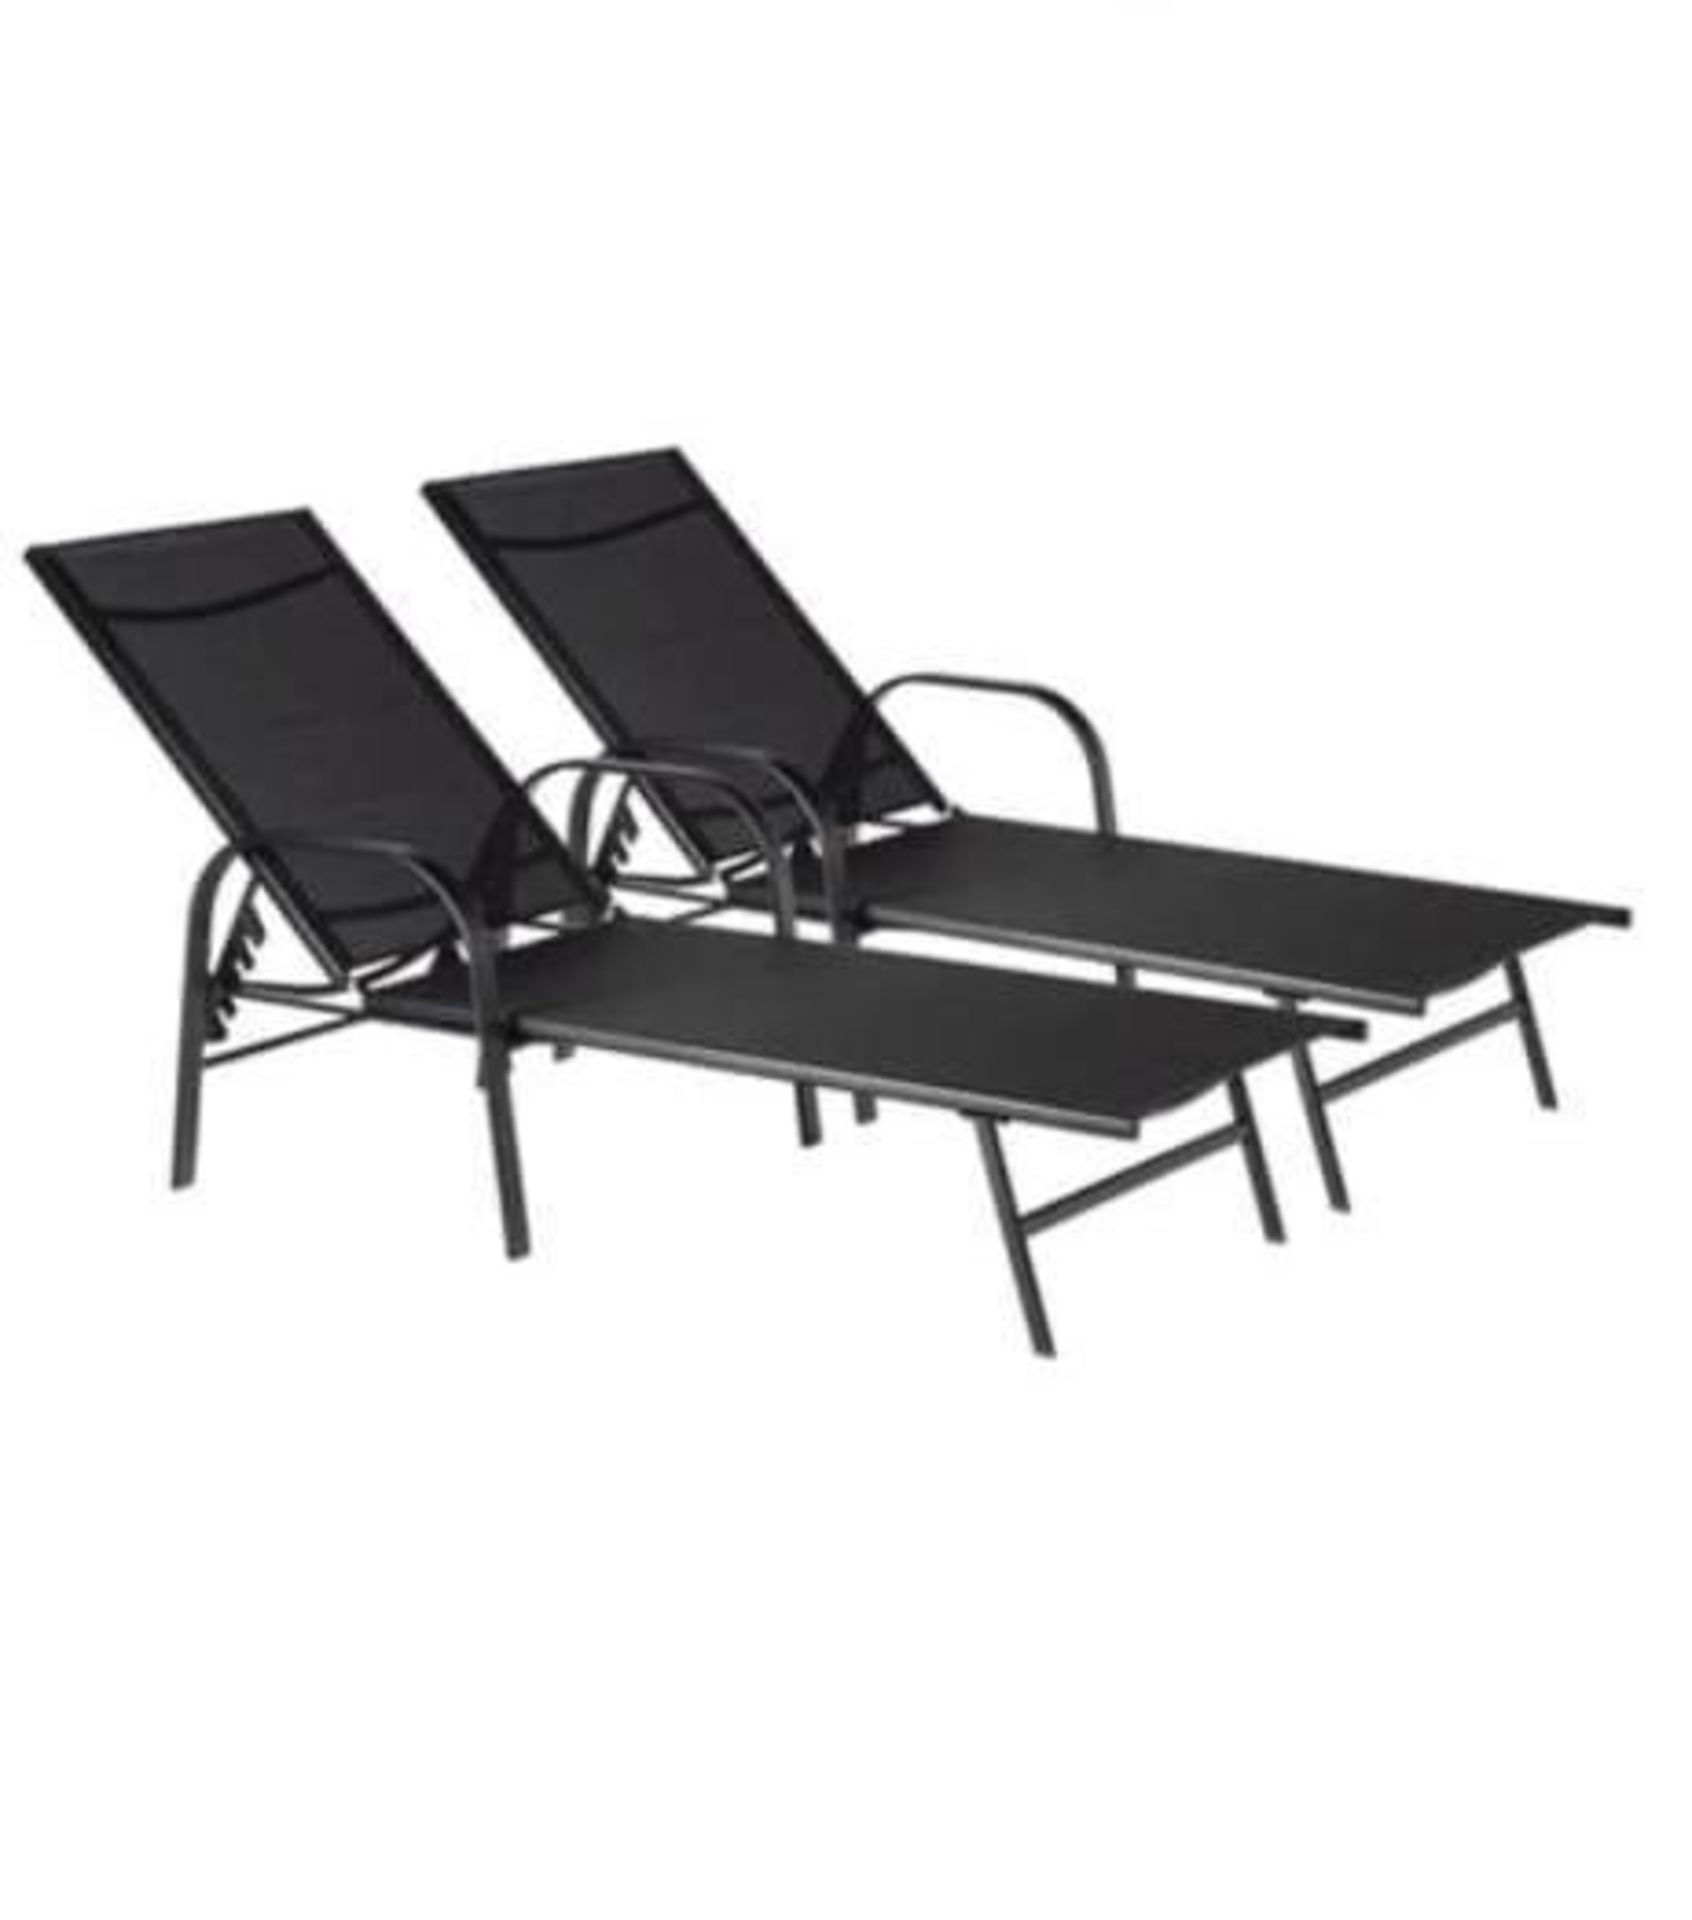 BRAND NEW & BOXED TRADE LOT - 2 X Adjustable Reclining Outdoor Patio Sun Lounger in Black